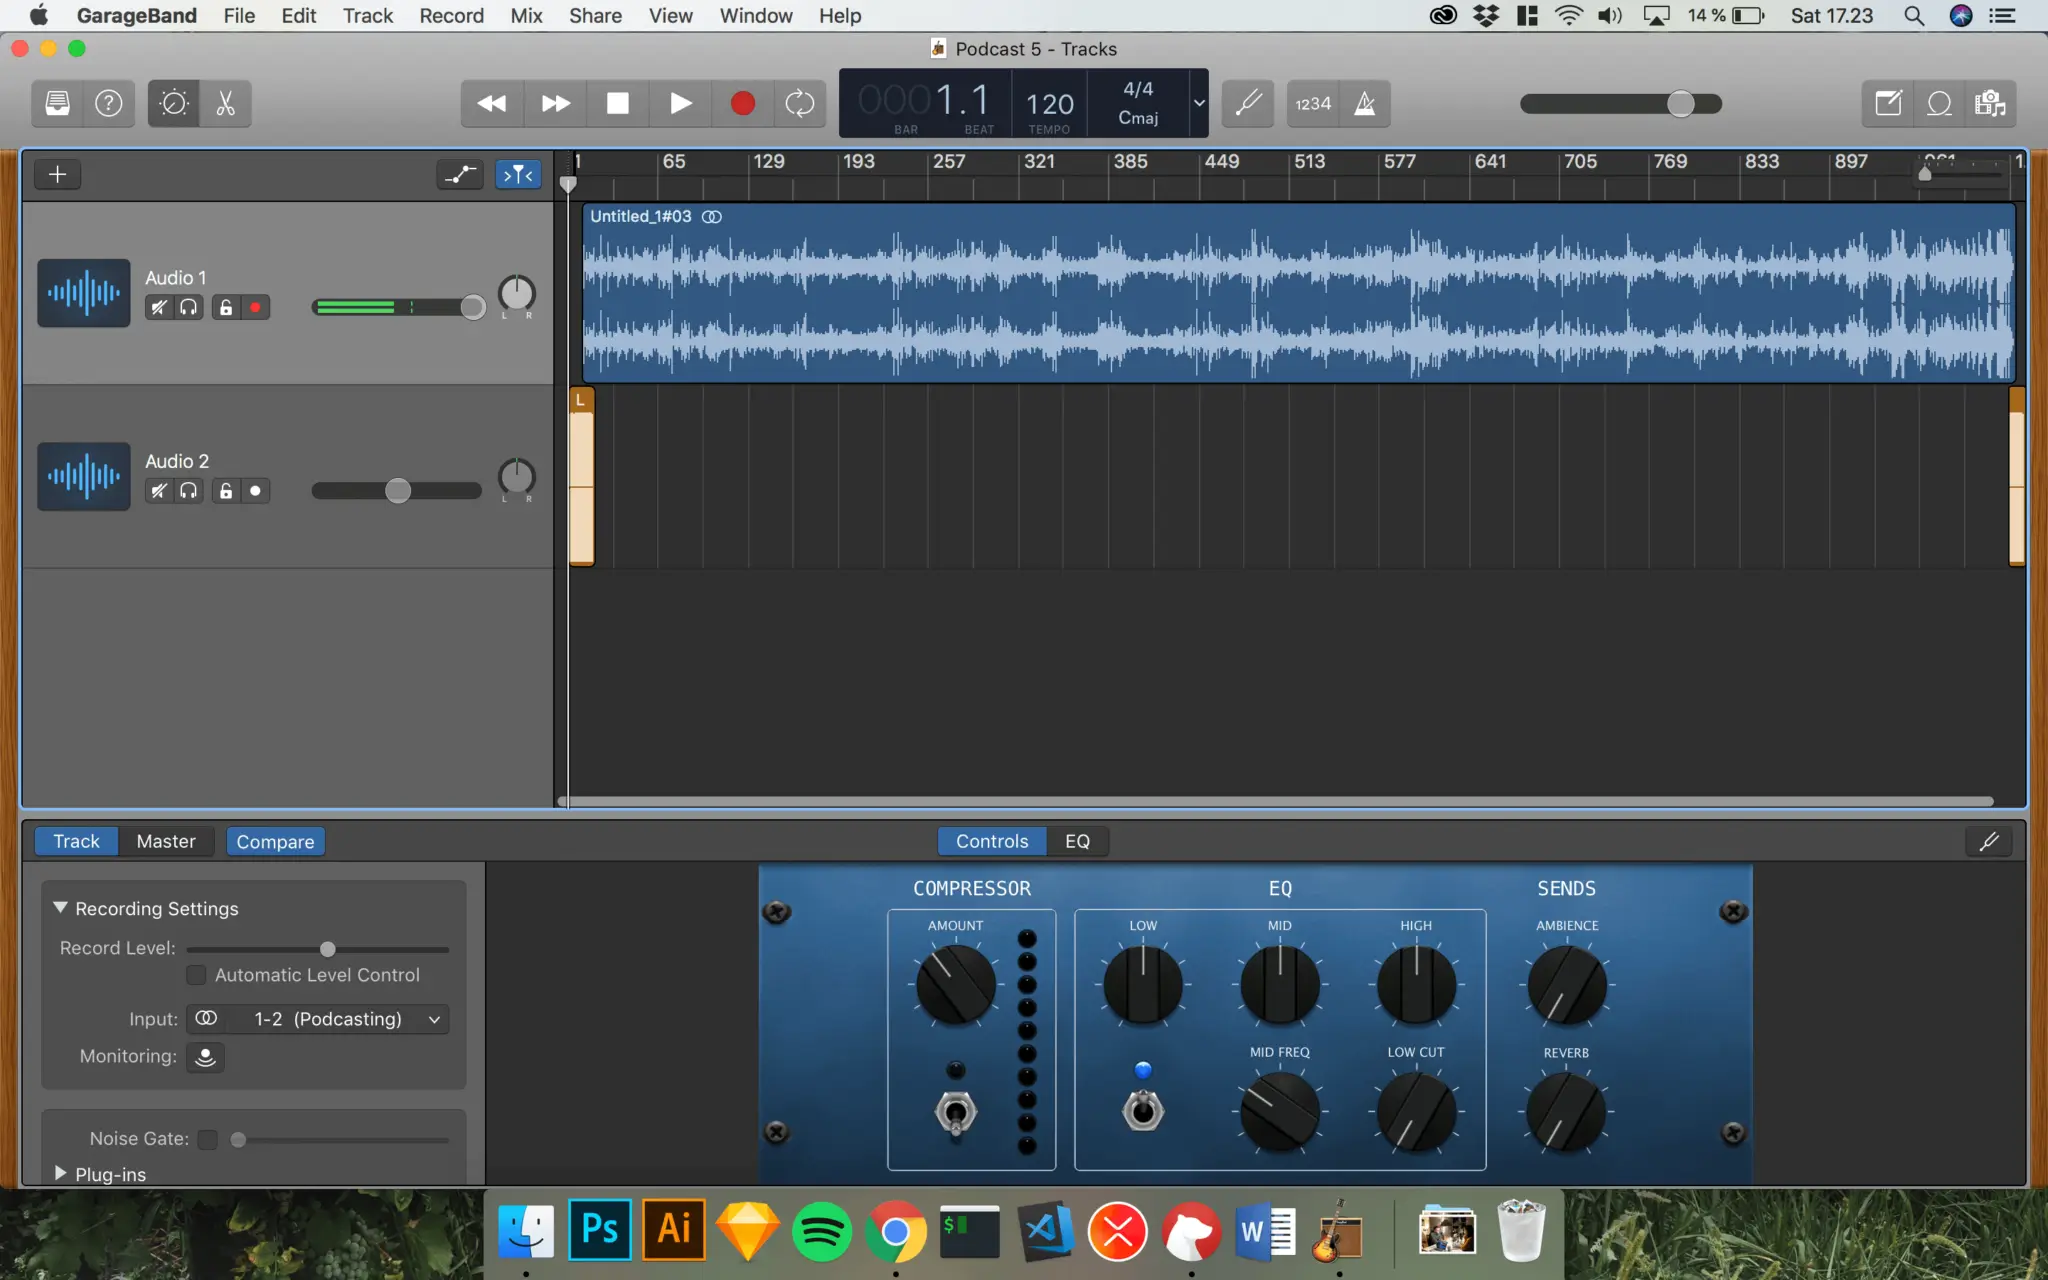 Screenshot from the interface of Apple Garageband with 2 audio tracks